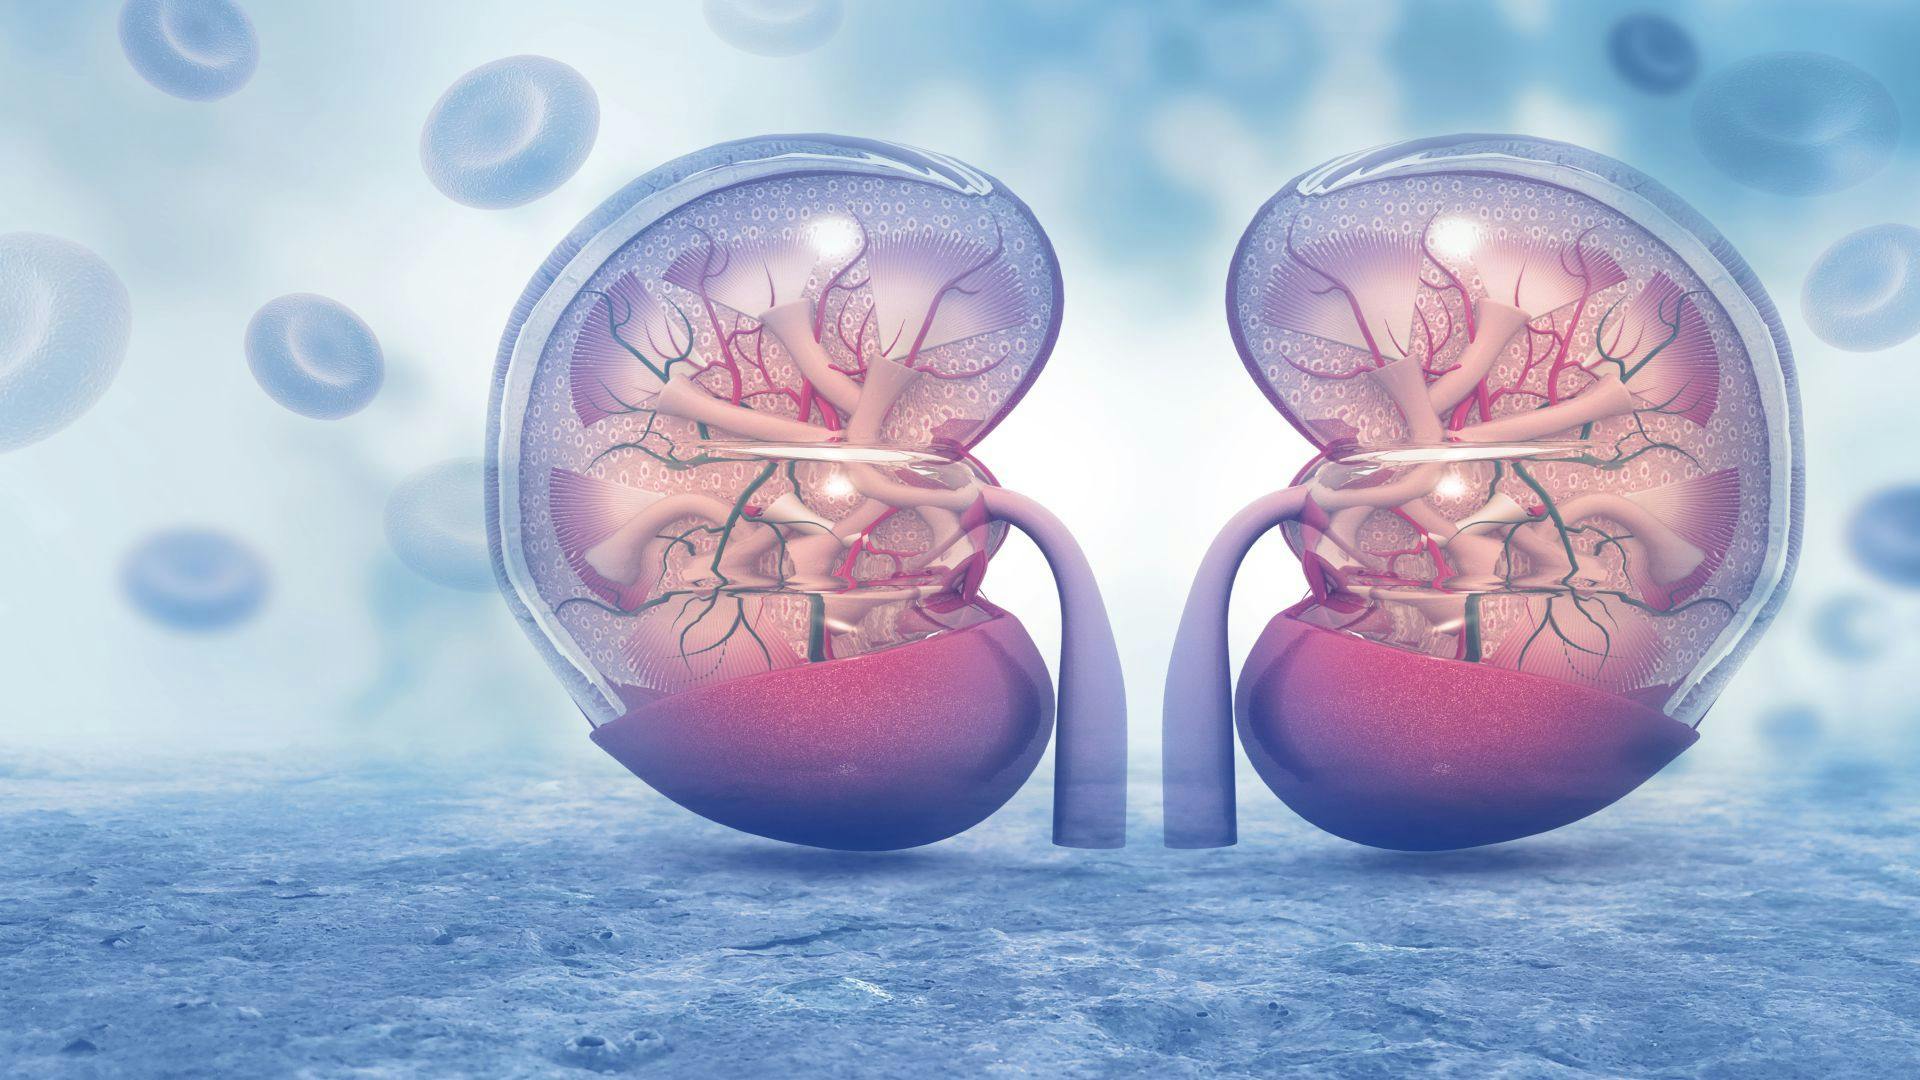 Steroid Treatment for Type of Kidney Disease Associated With Increased Risk for Serious Infections